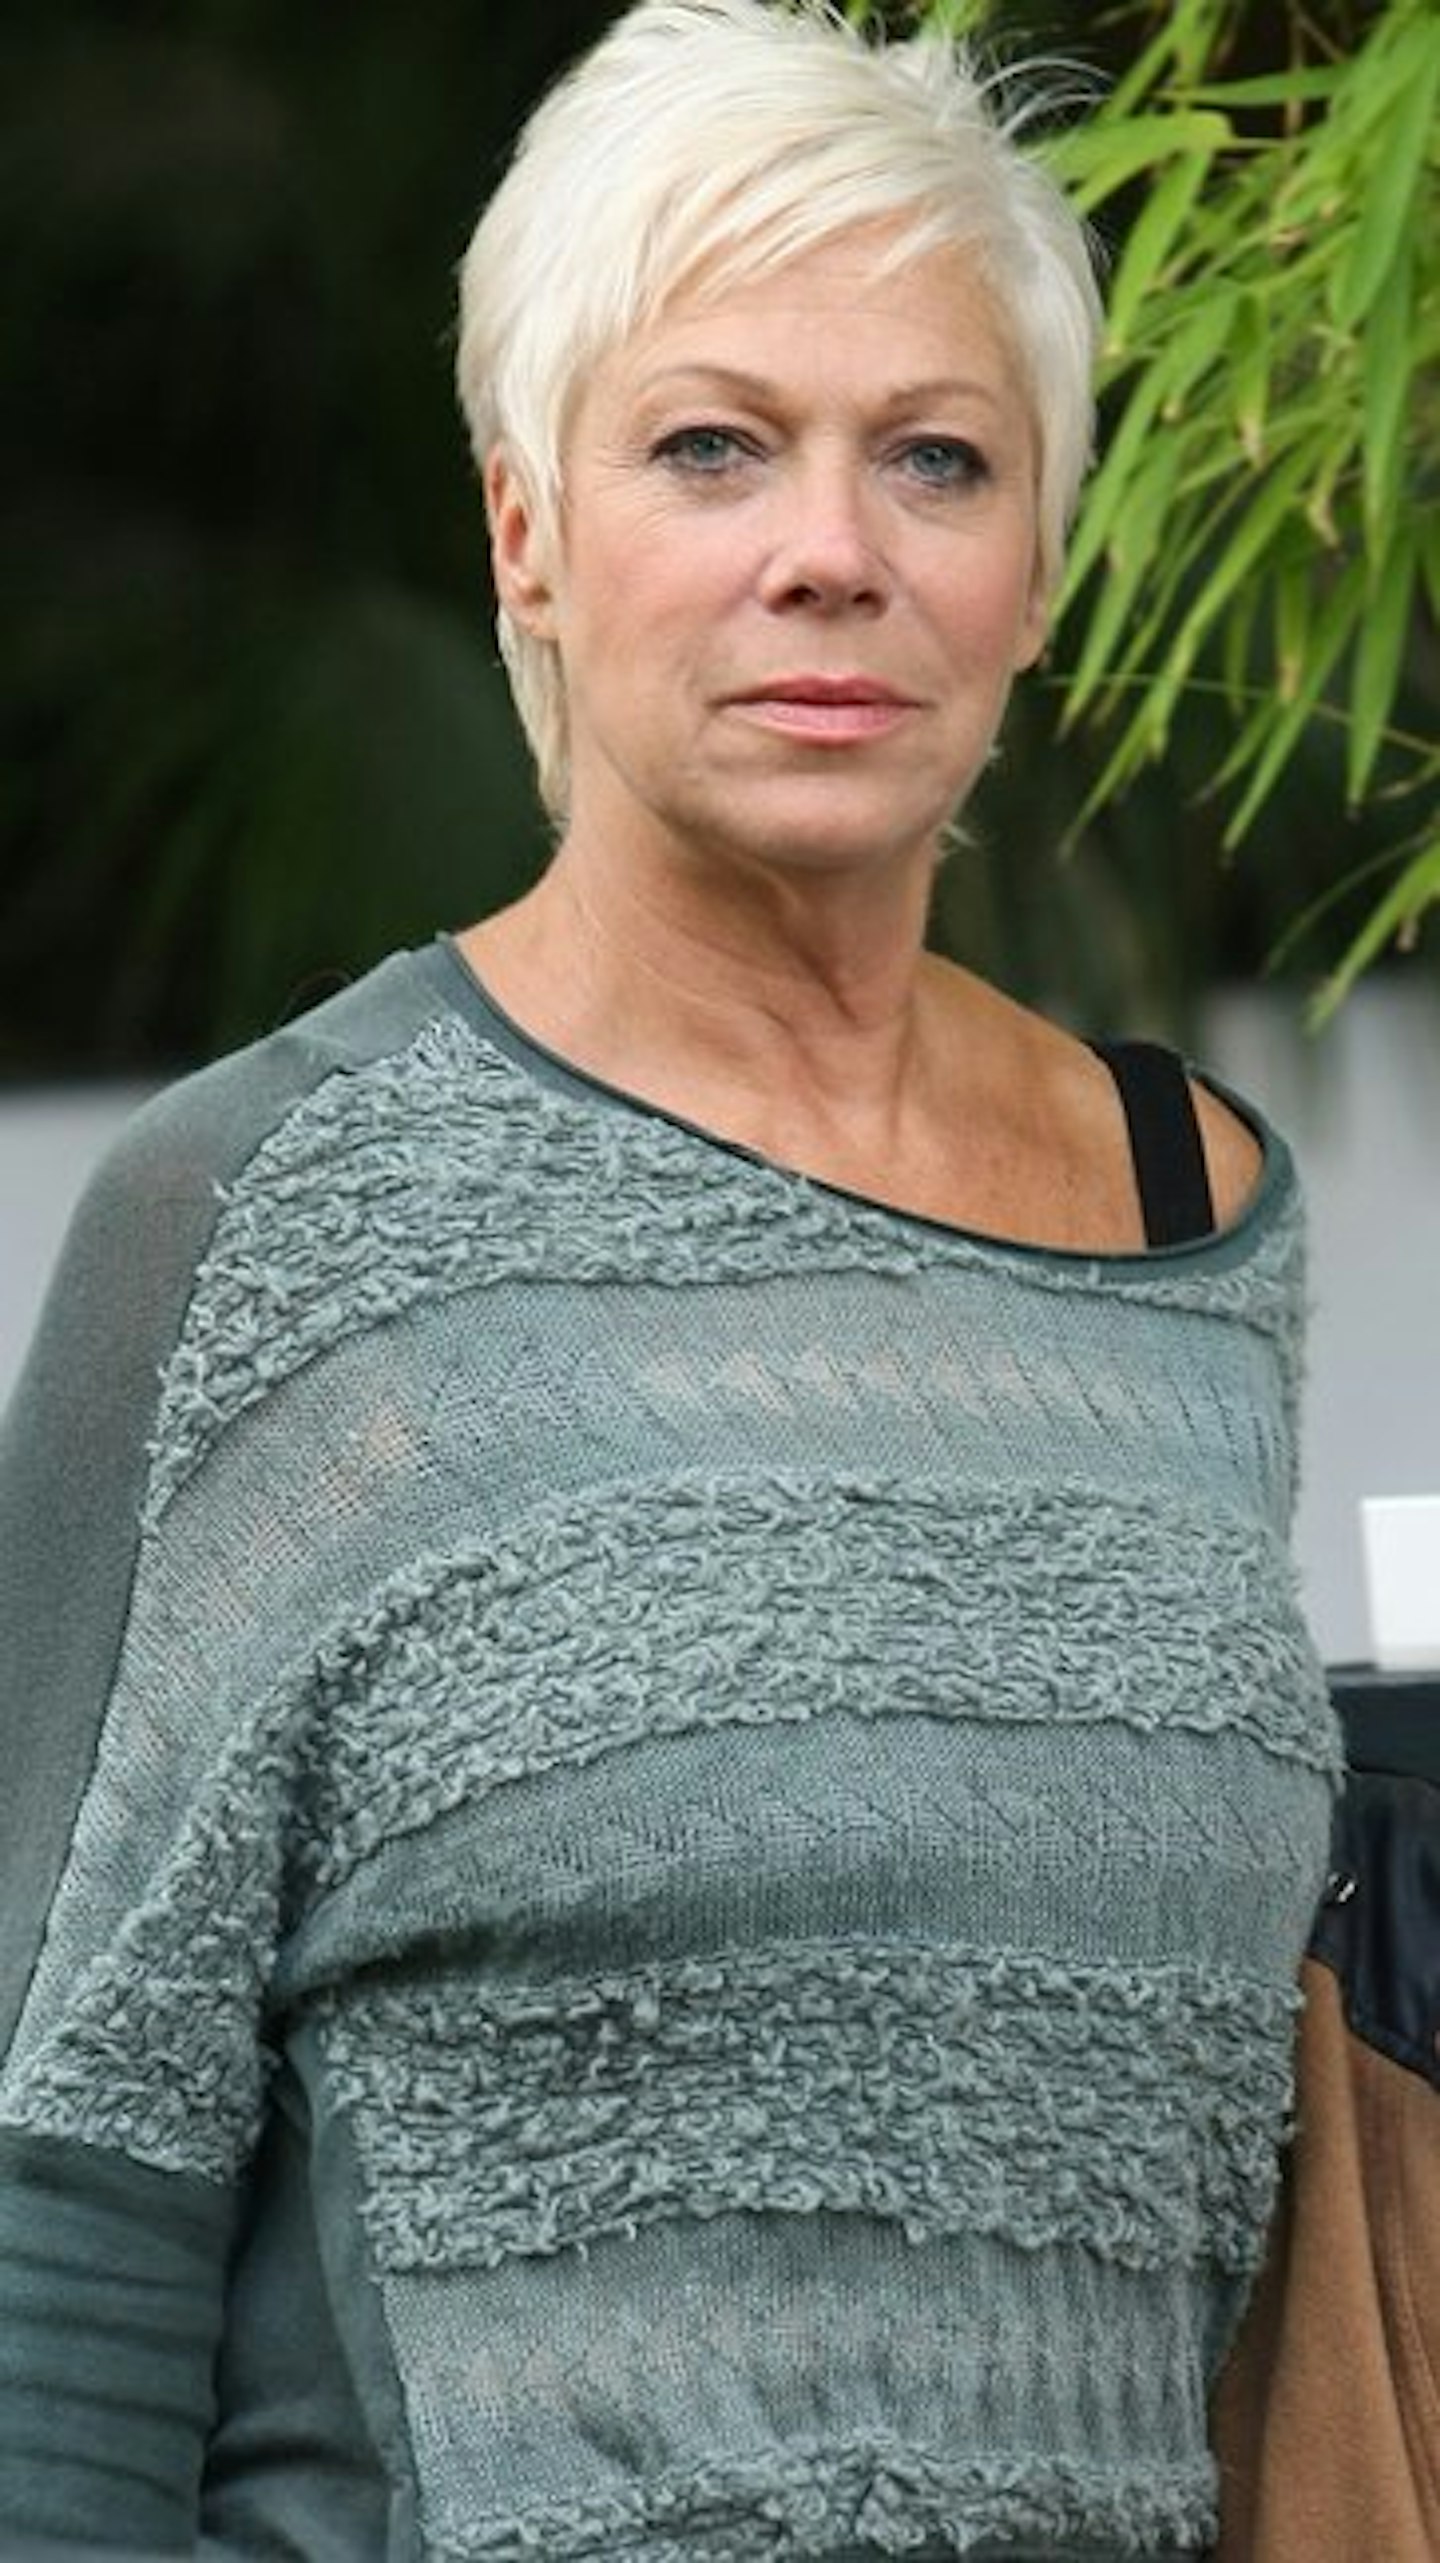 Denise Welch left the popular day time show